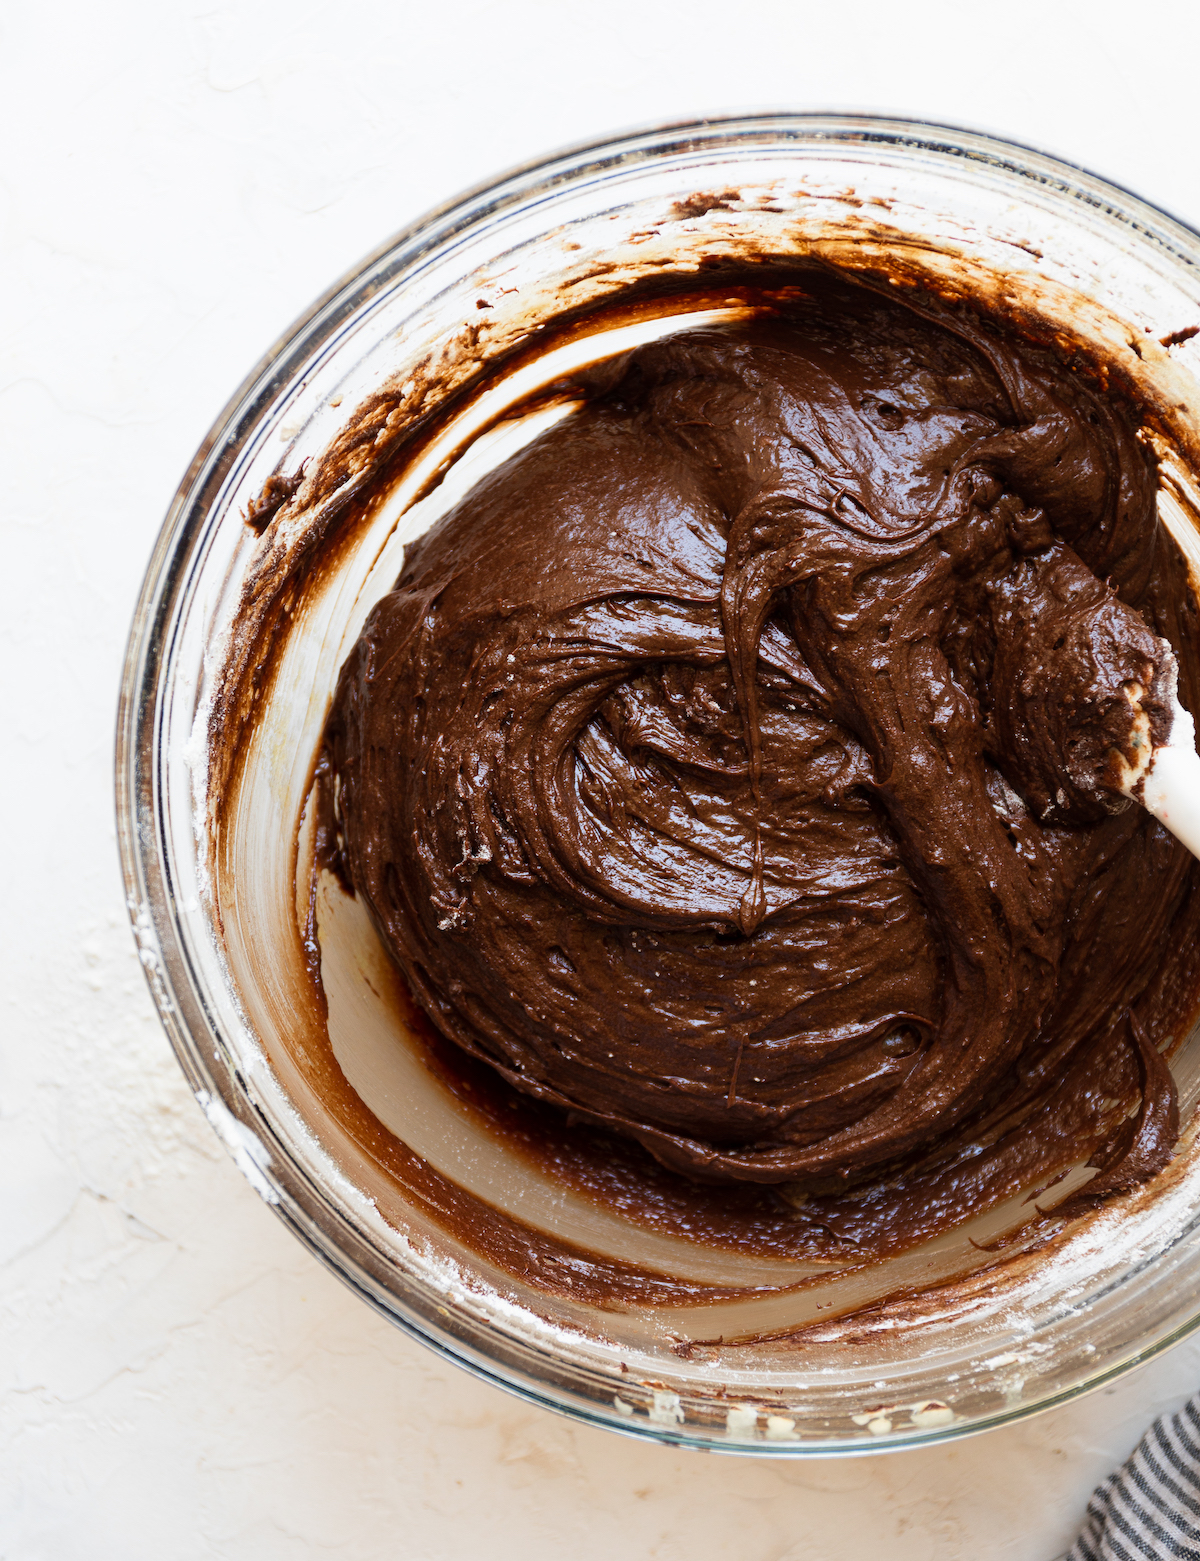 The mixed brownie batter